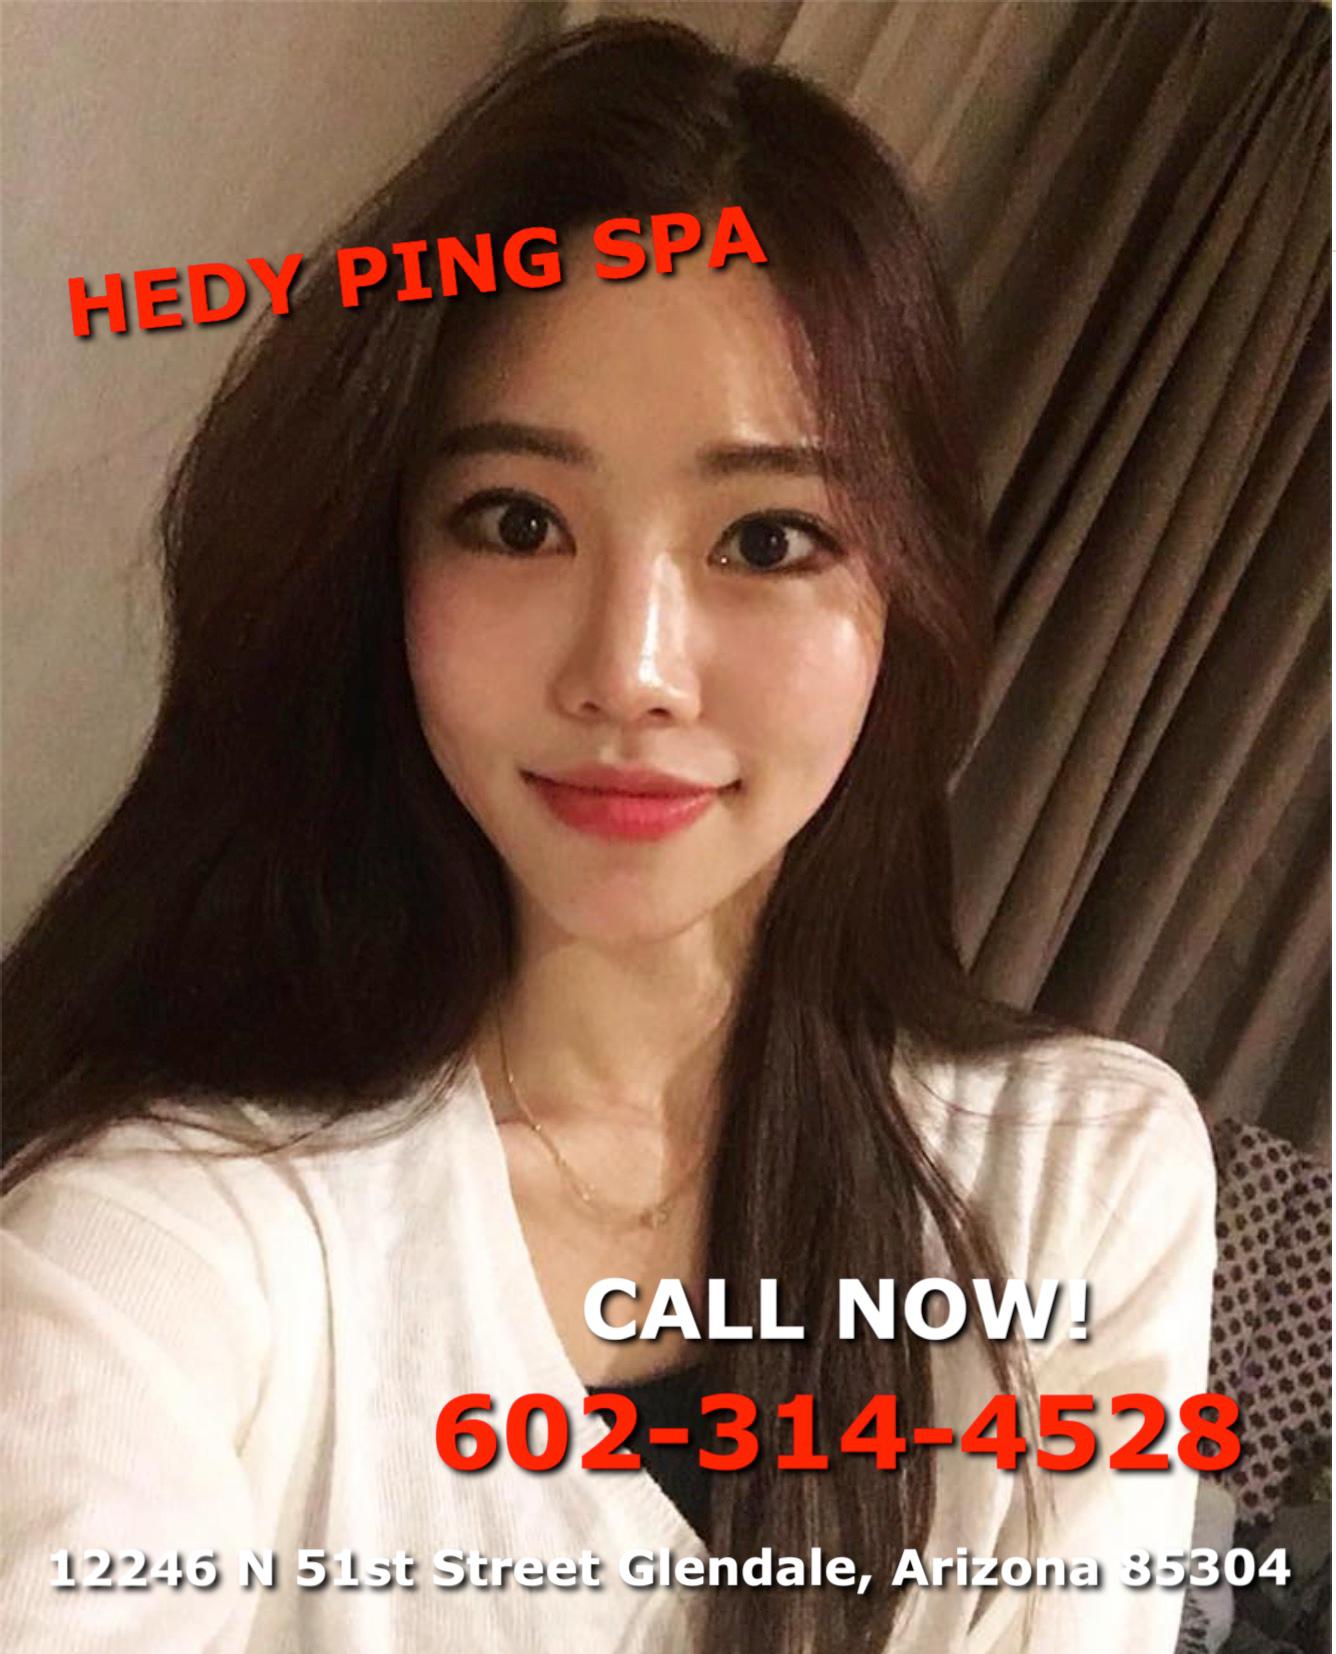 Hedy Ping Spa Photo